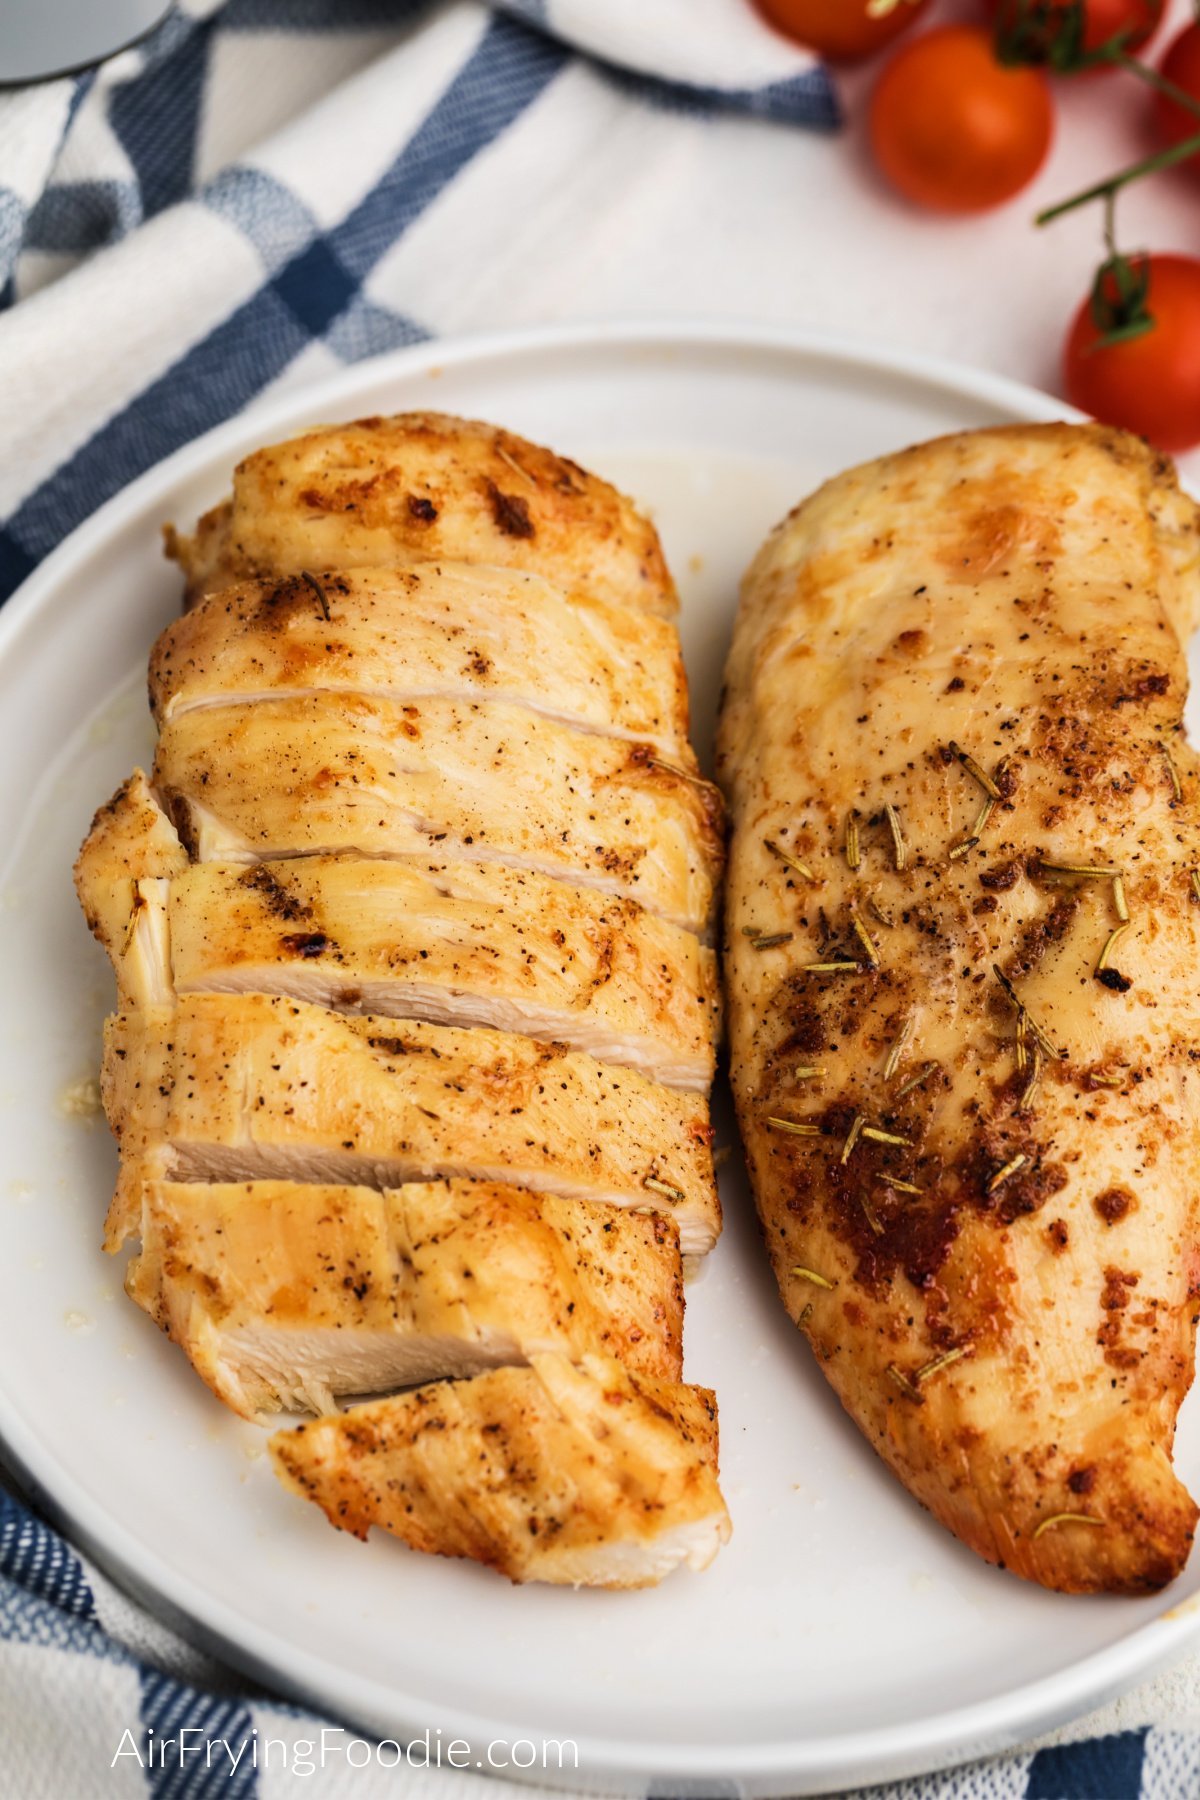 Air fryer grilled chicken breast on a white plate, sliced and whole chicken breasts on the plate.